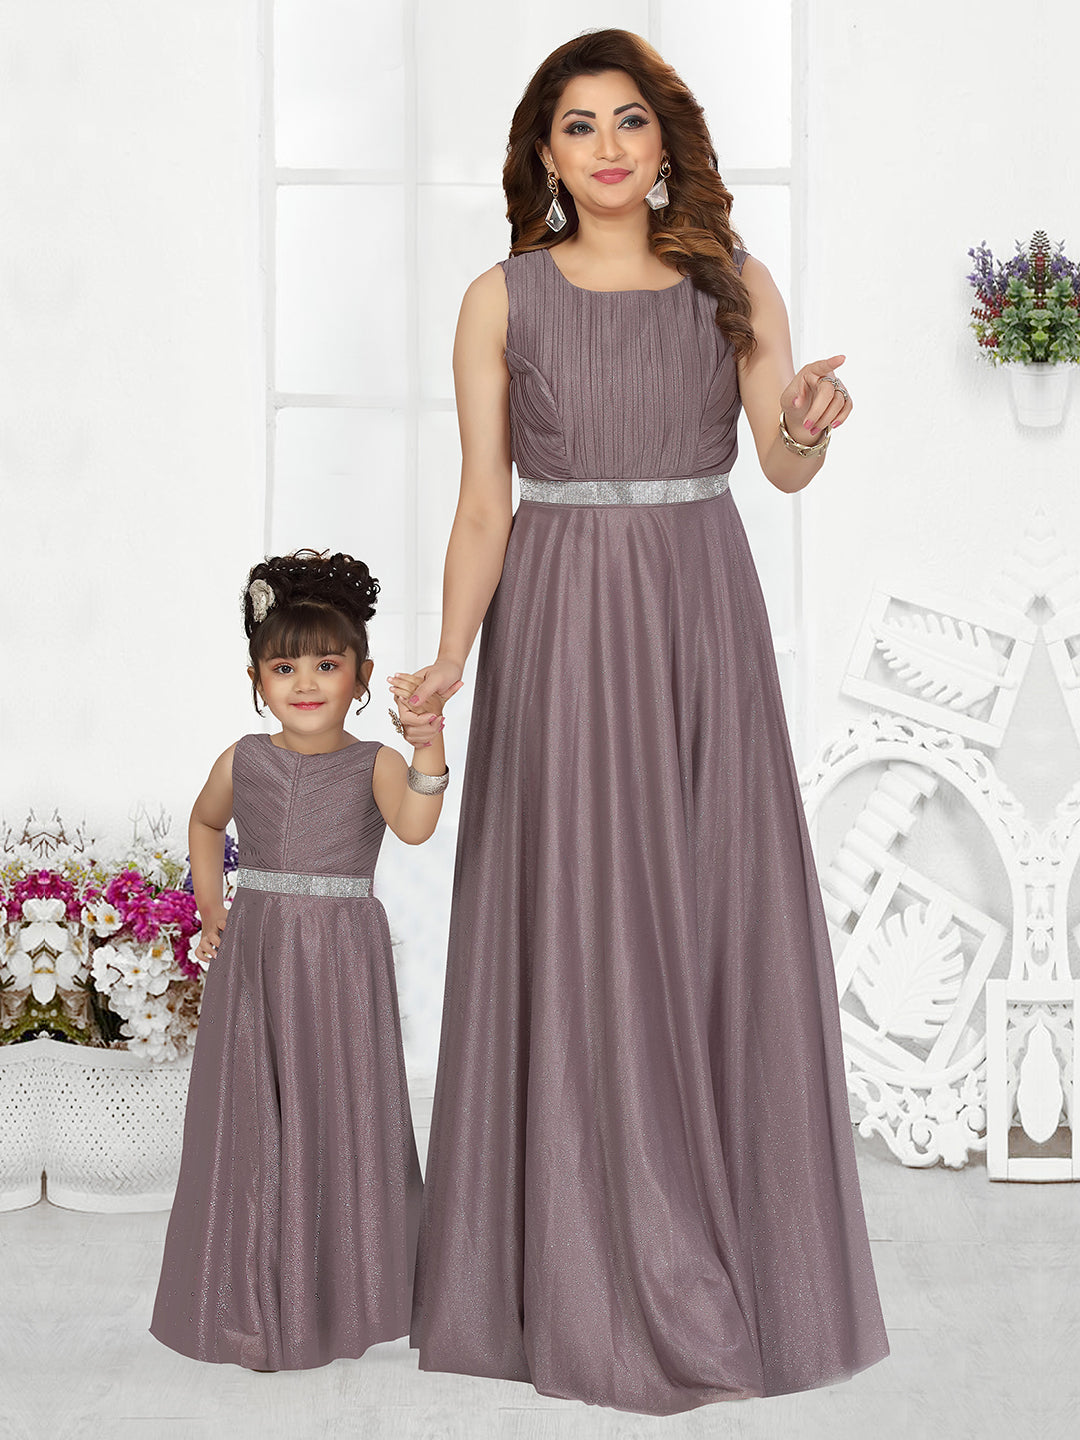 Akkriti by Pantaloons Women Gown Gold, Brown Dress - Buy Akkriti by  Pantaloons Women Gown Gold, Brown Dress Online at Best Prices in India |  Flipkart.com